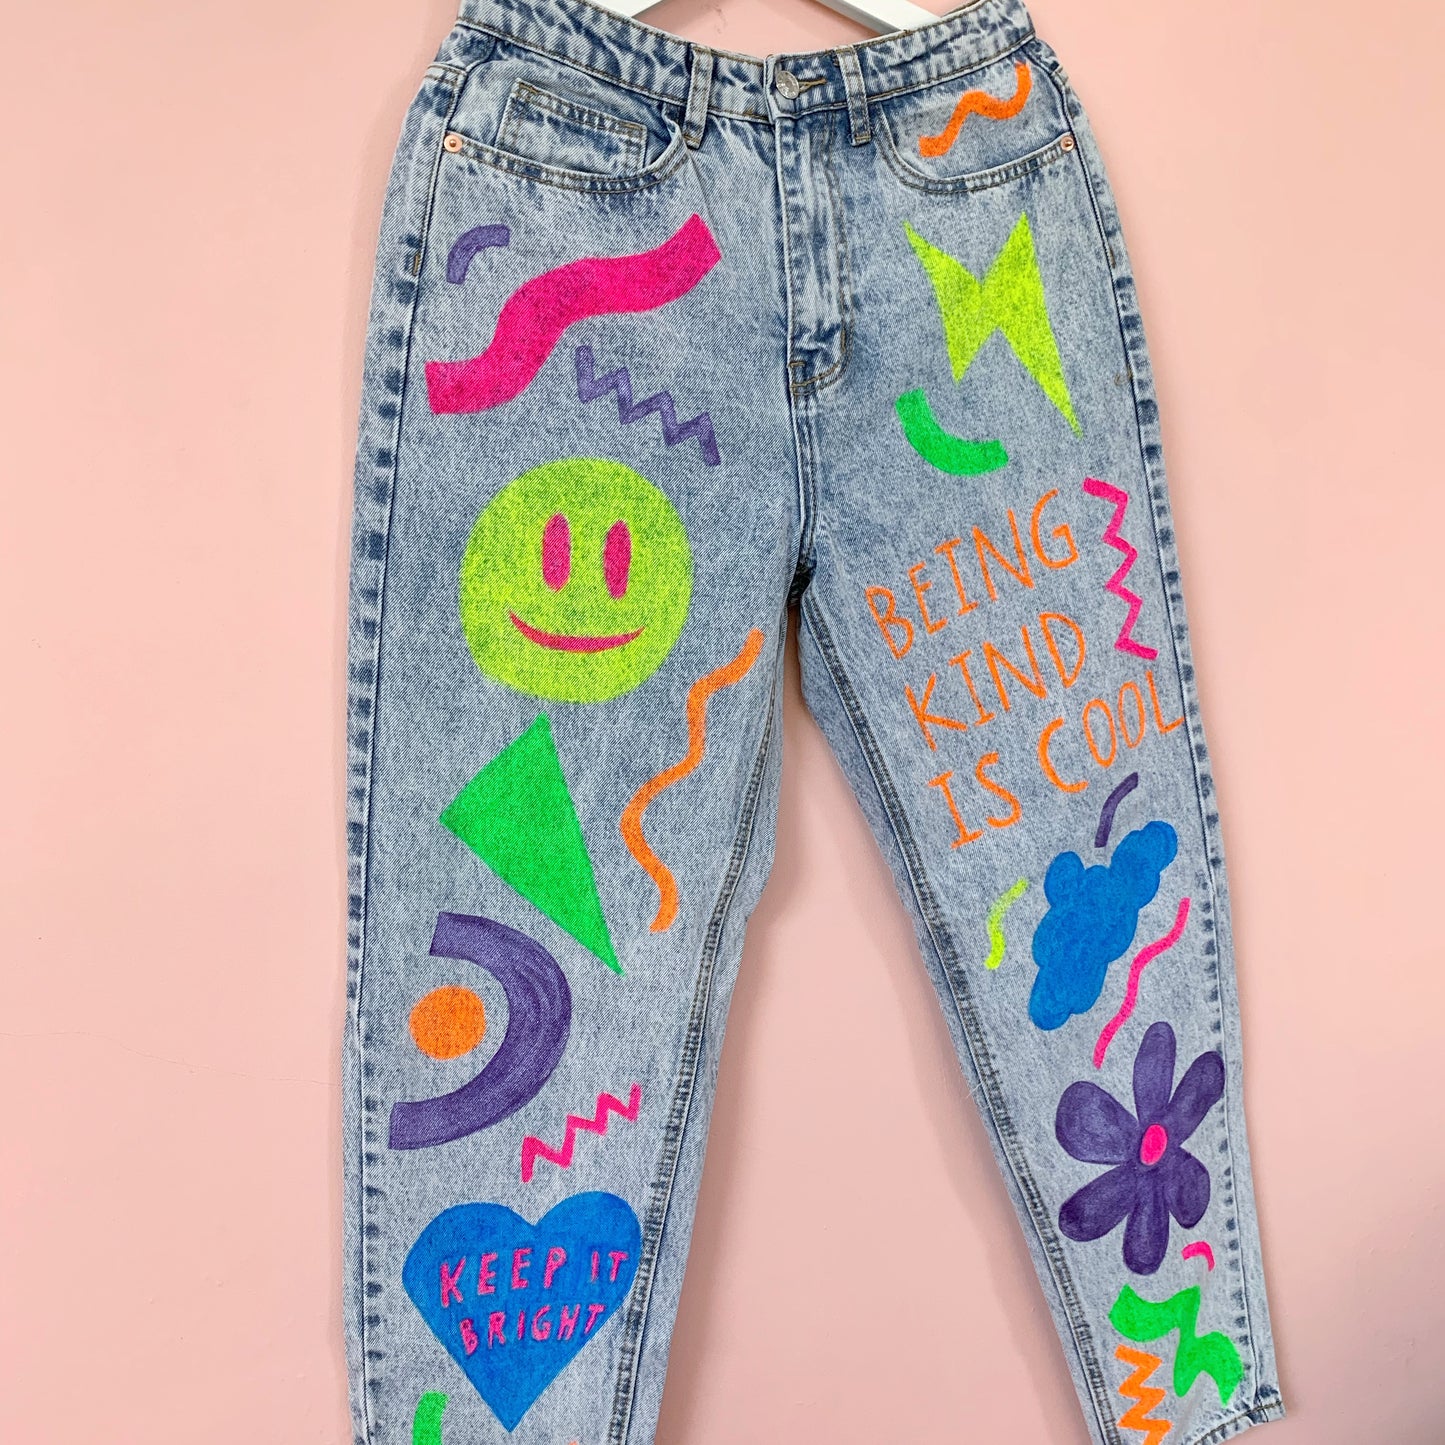 bright side mom jeans - UK size 8/10